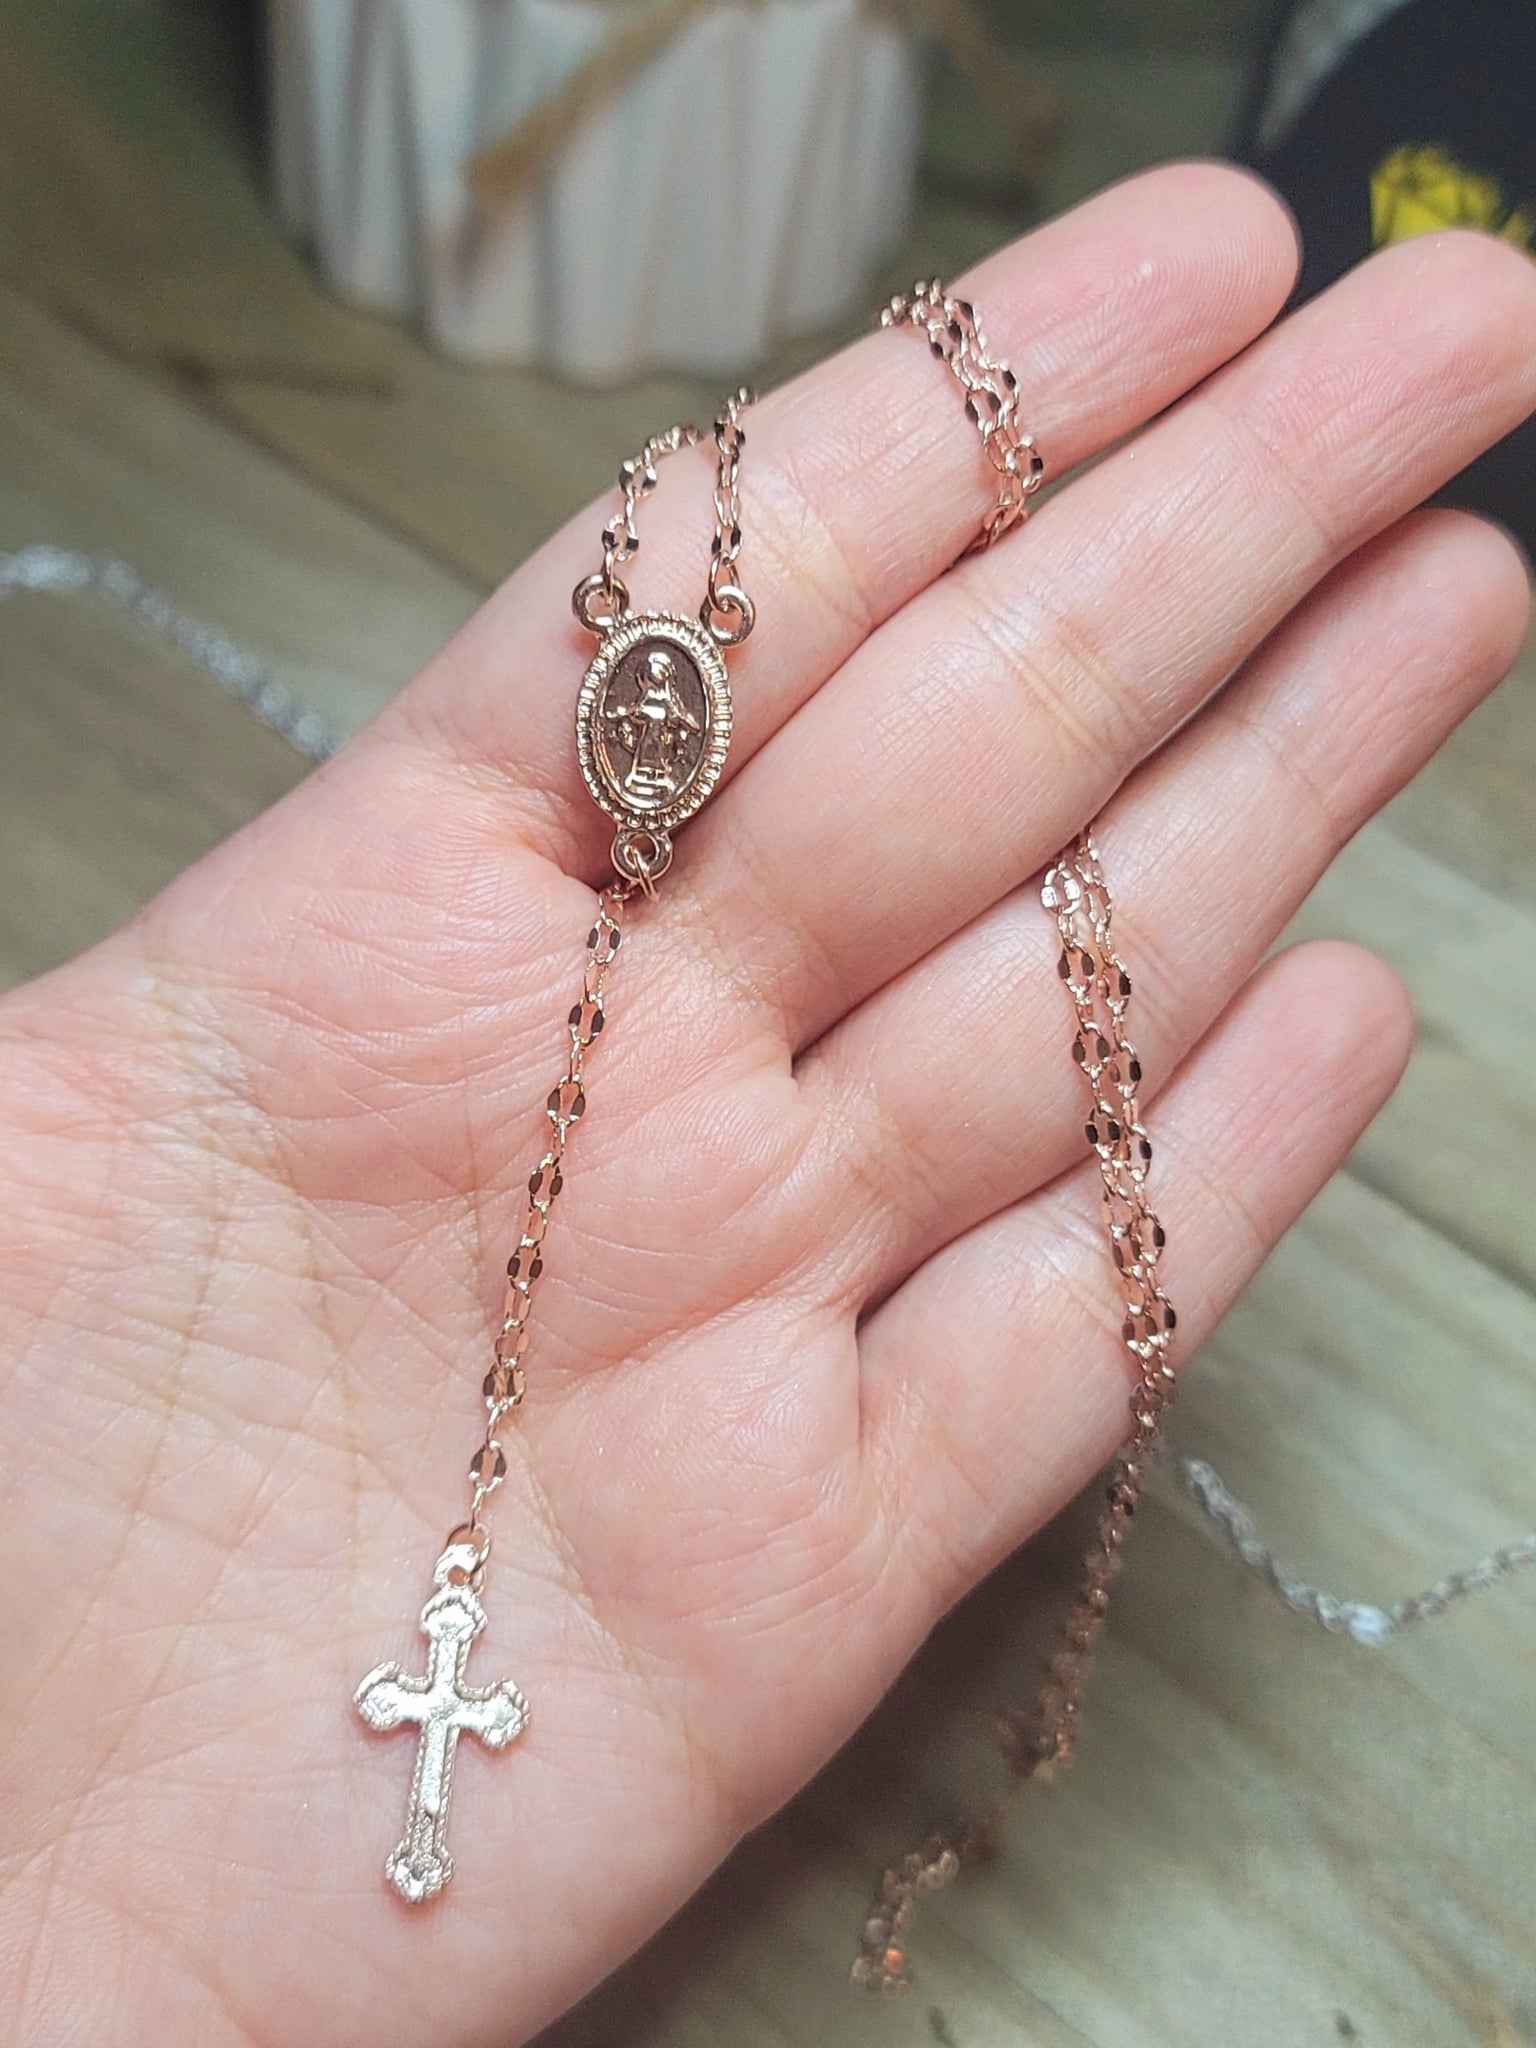 Pearl Rosary Necklace, Gold Rosary Necklaces ,catholic Jewelry Plain Cross  Confirmation Anniversary Gift, Miraculous, Dainty Necklace , Gold - Etsy |  Sieraden, Sieraden ideeën, Gouden ketting